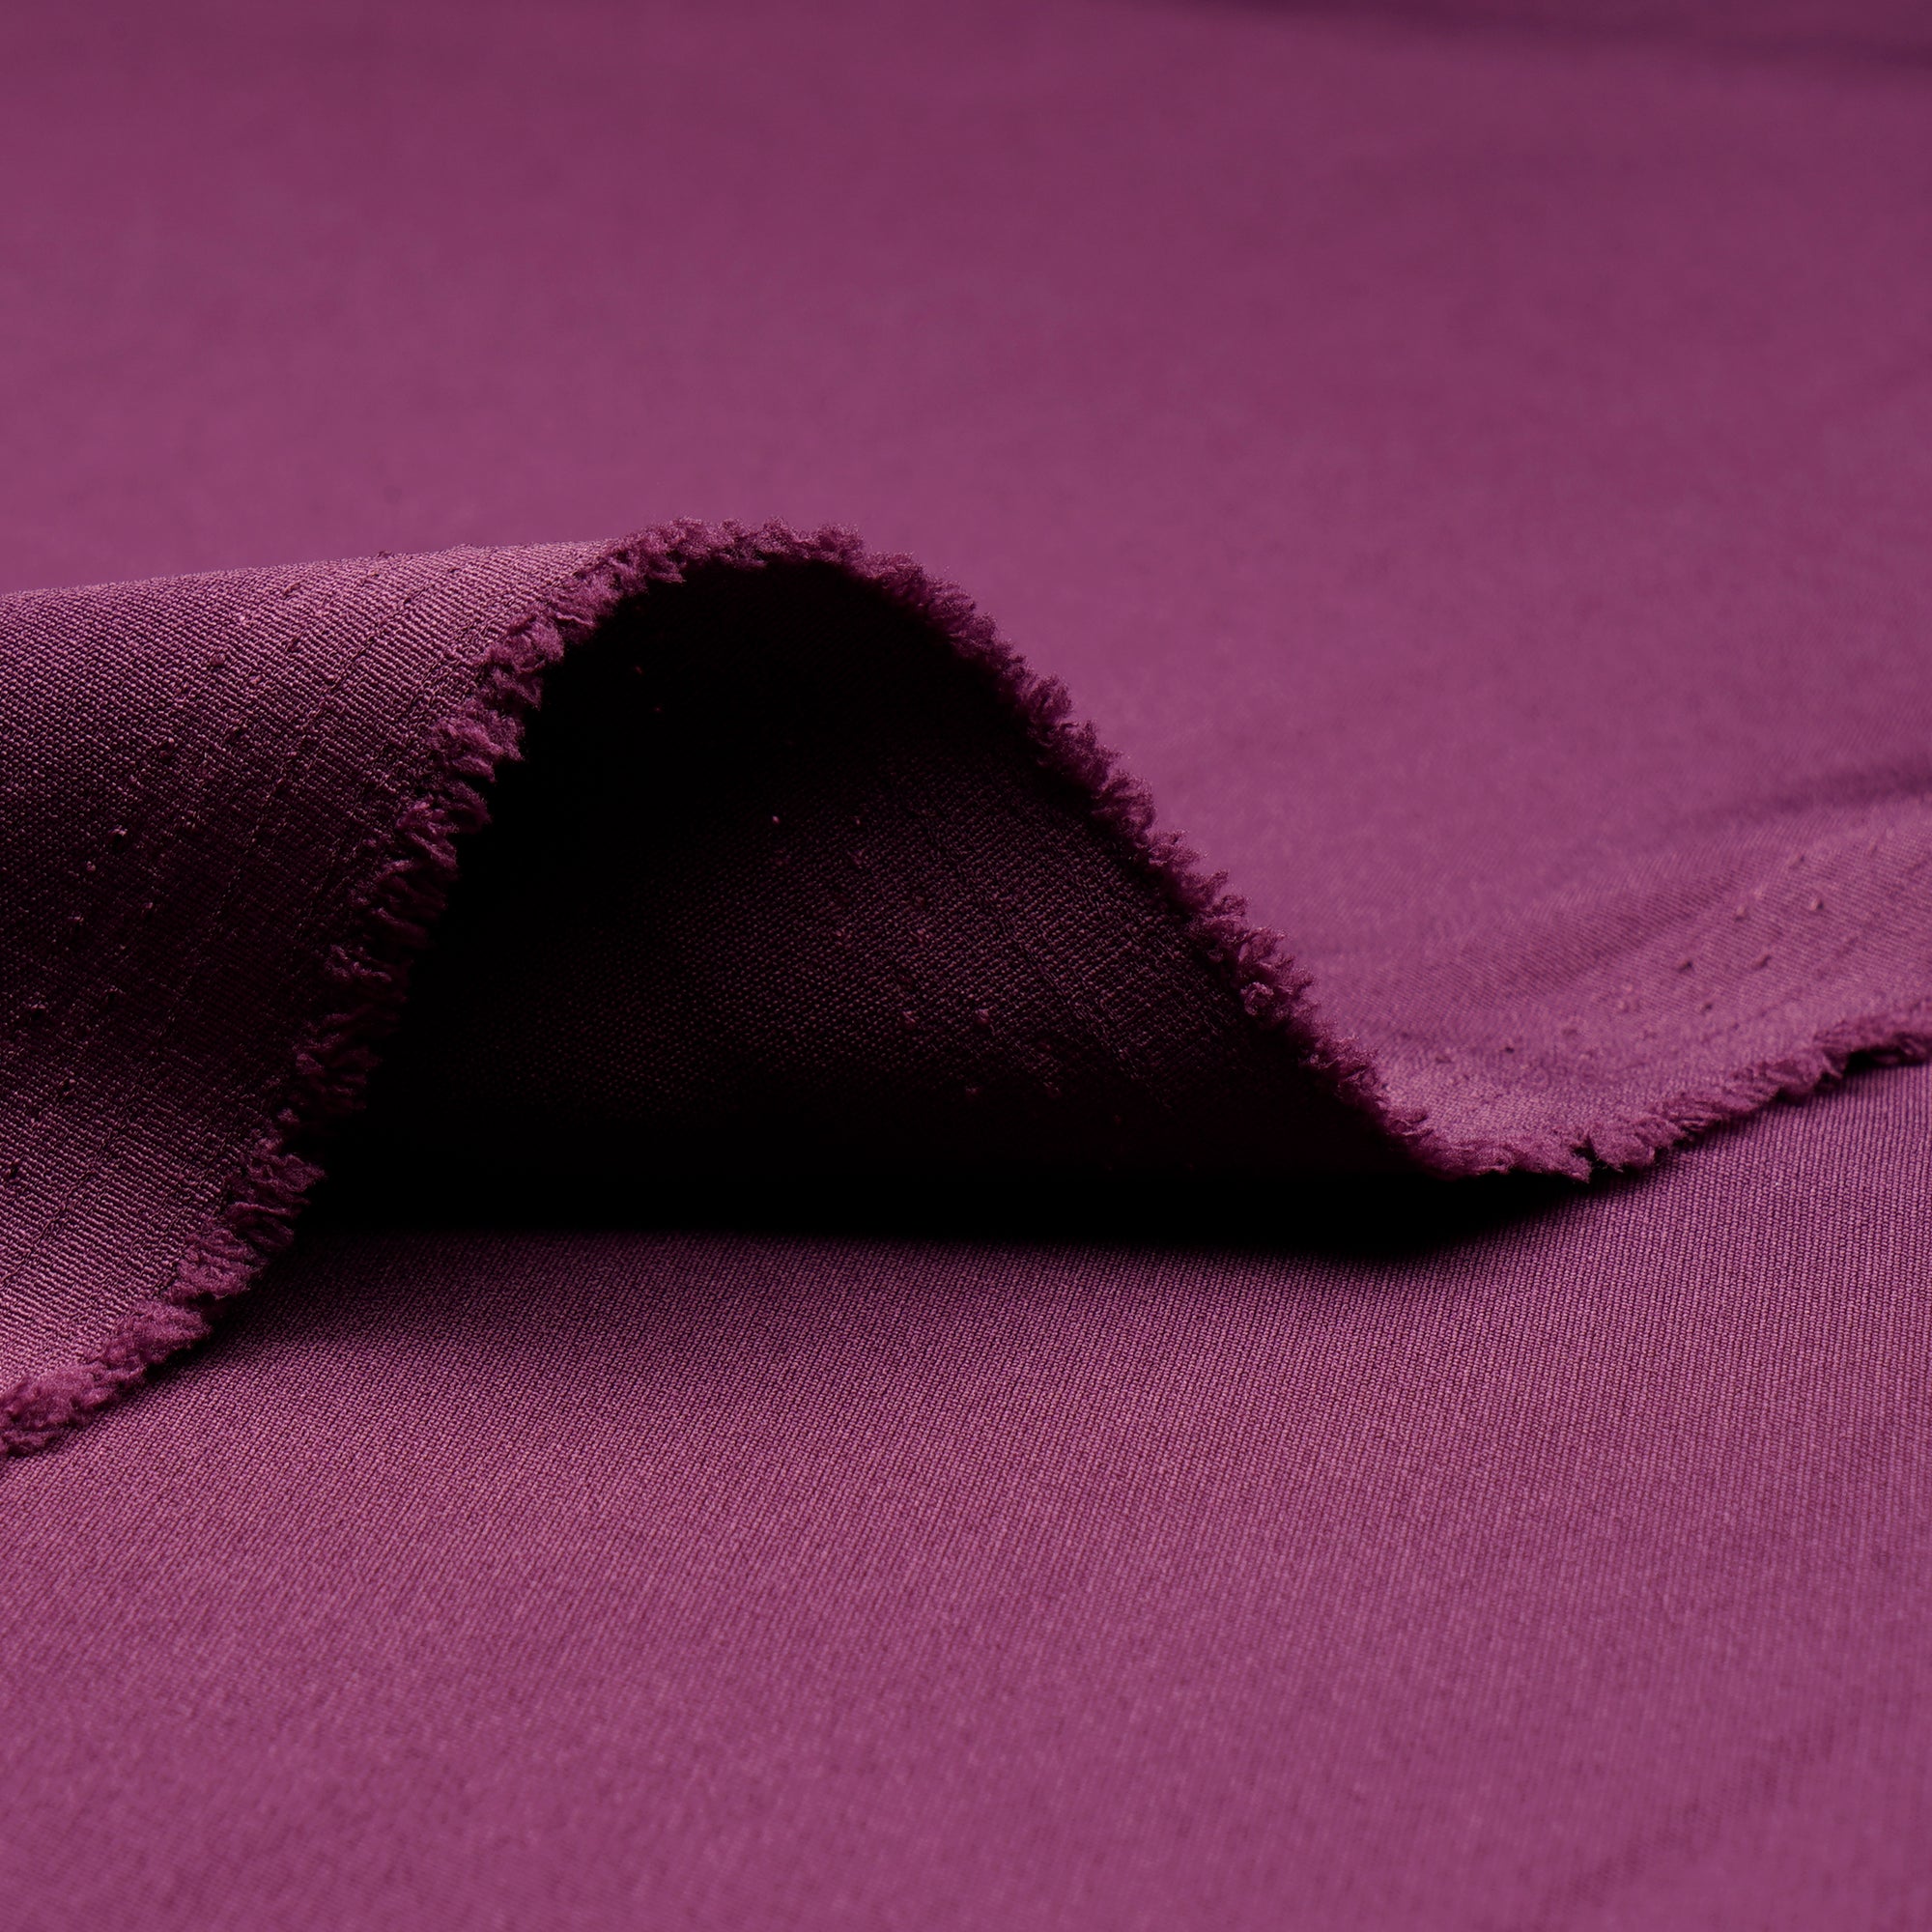 Purple Solid Dyed Imported Banana Crepe Fabric (60" Width)